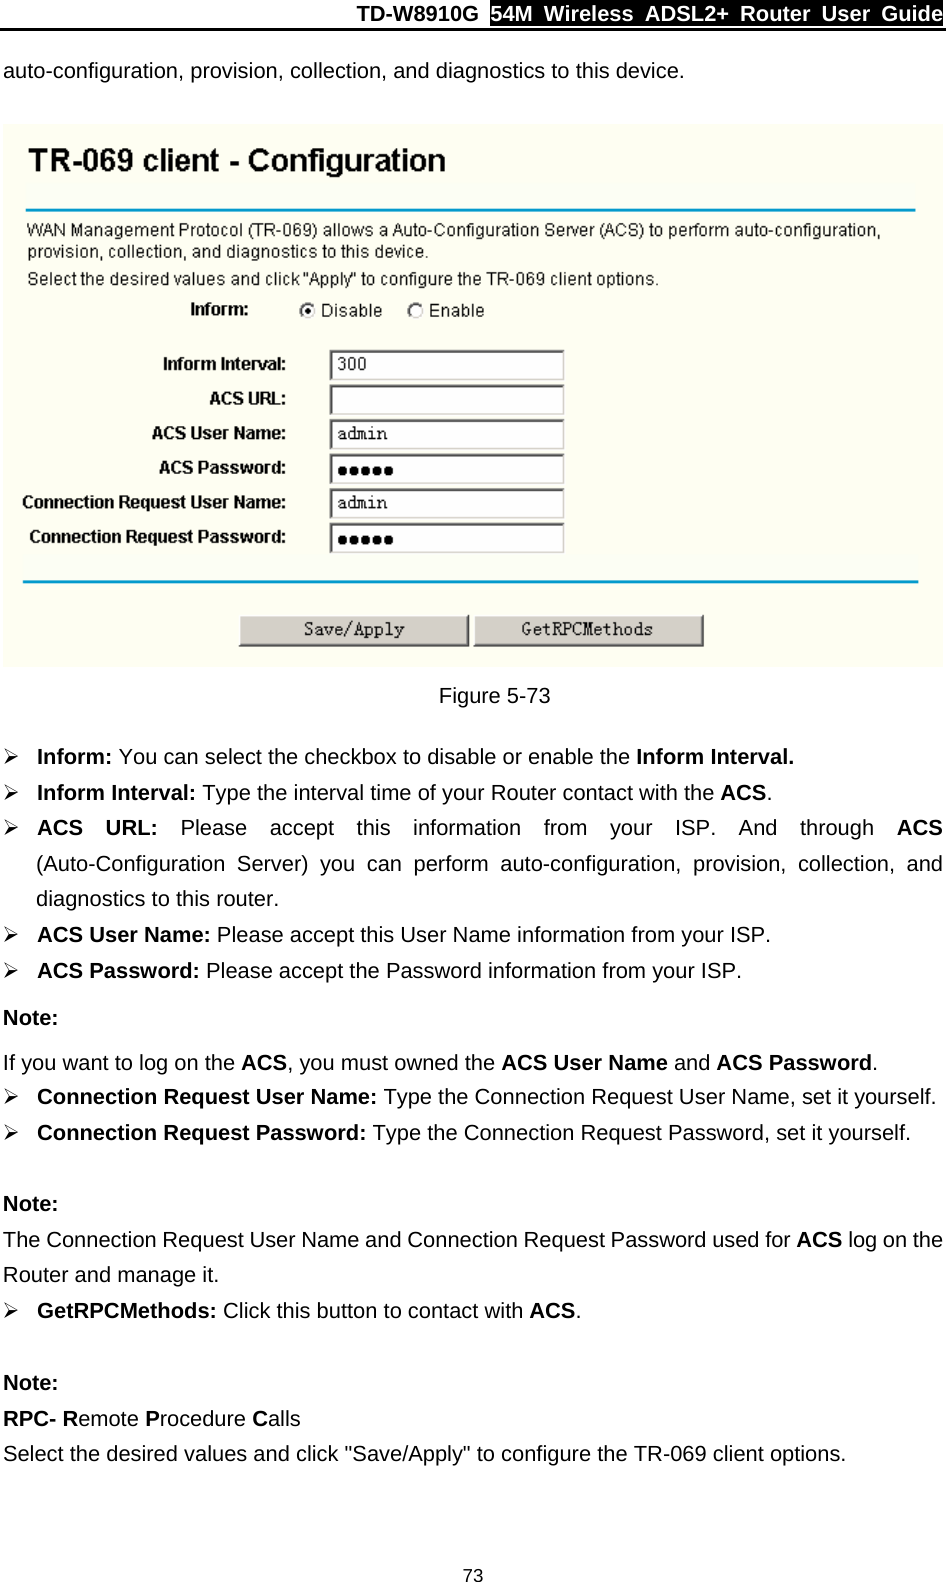 TD-W8910G  54M Wireless ADSL2+ Router User Guide  73auto-configuration, provision, collection, and diagnostics to this device.   Figure 5-73 ¾ Inform: You can select the checkbox to disable or enable the Inform Interval. ¾ Inform Interval: Type the interval time of your Router contact with the ACS.  ¾ ACS URL: Please accept this information from your ISP. And through ACS (Auto-Configuration Server) you can perform auto-configuration, provision, collection, and diagnostics to this router.   ¾ ACS User Name: Please accept this User Name information from your ISP. ¾ ACS Password: Please accept the Password information from your ISP. Note: If you want to log on the ACS, you must owned the ACS User Name and ACS Password. ¾ Connection Request User Name: Type the Connection Request User Name, set it yourself. ¾ Connection Request Password: Type the Connection Request Password, set it yourself.  Note: The Connection Request User Name and Connection Request Password used for ACS log on the Router and manage it. ¾ GetRPCMethods: Click this button to contact with ACS.  Note: RPC- Remote Procedure Calls Select the desired values and click &quot;Save/Apply&quot; to configure the TR-069 client options. 